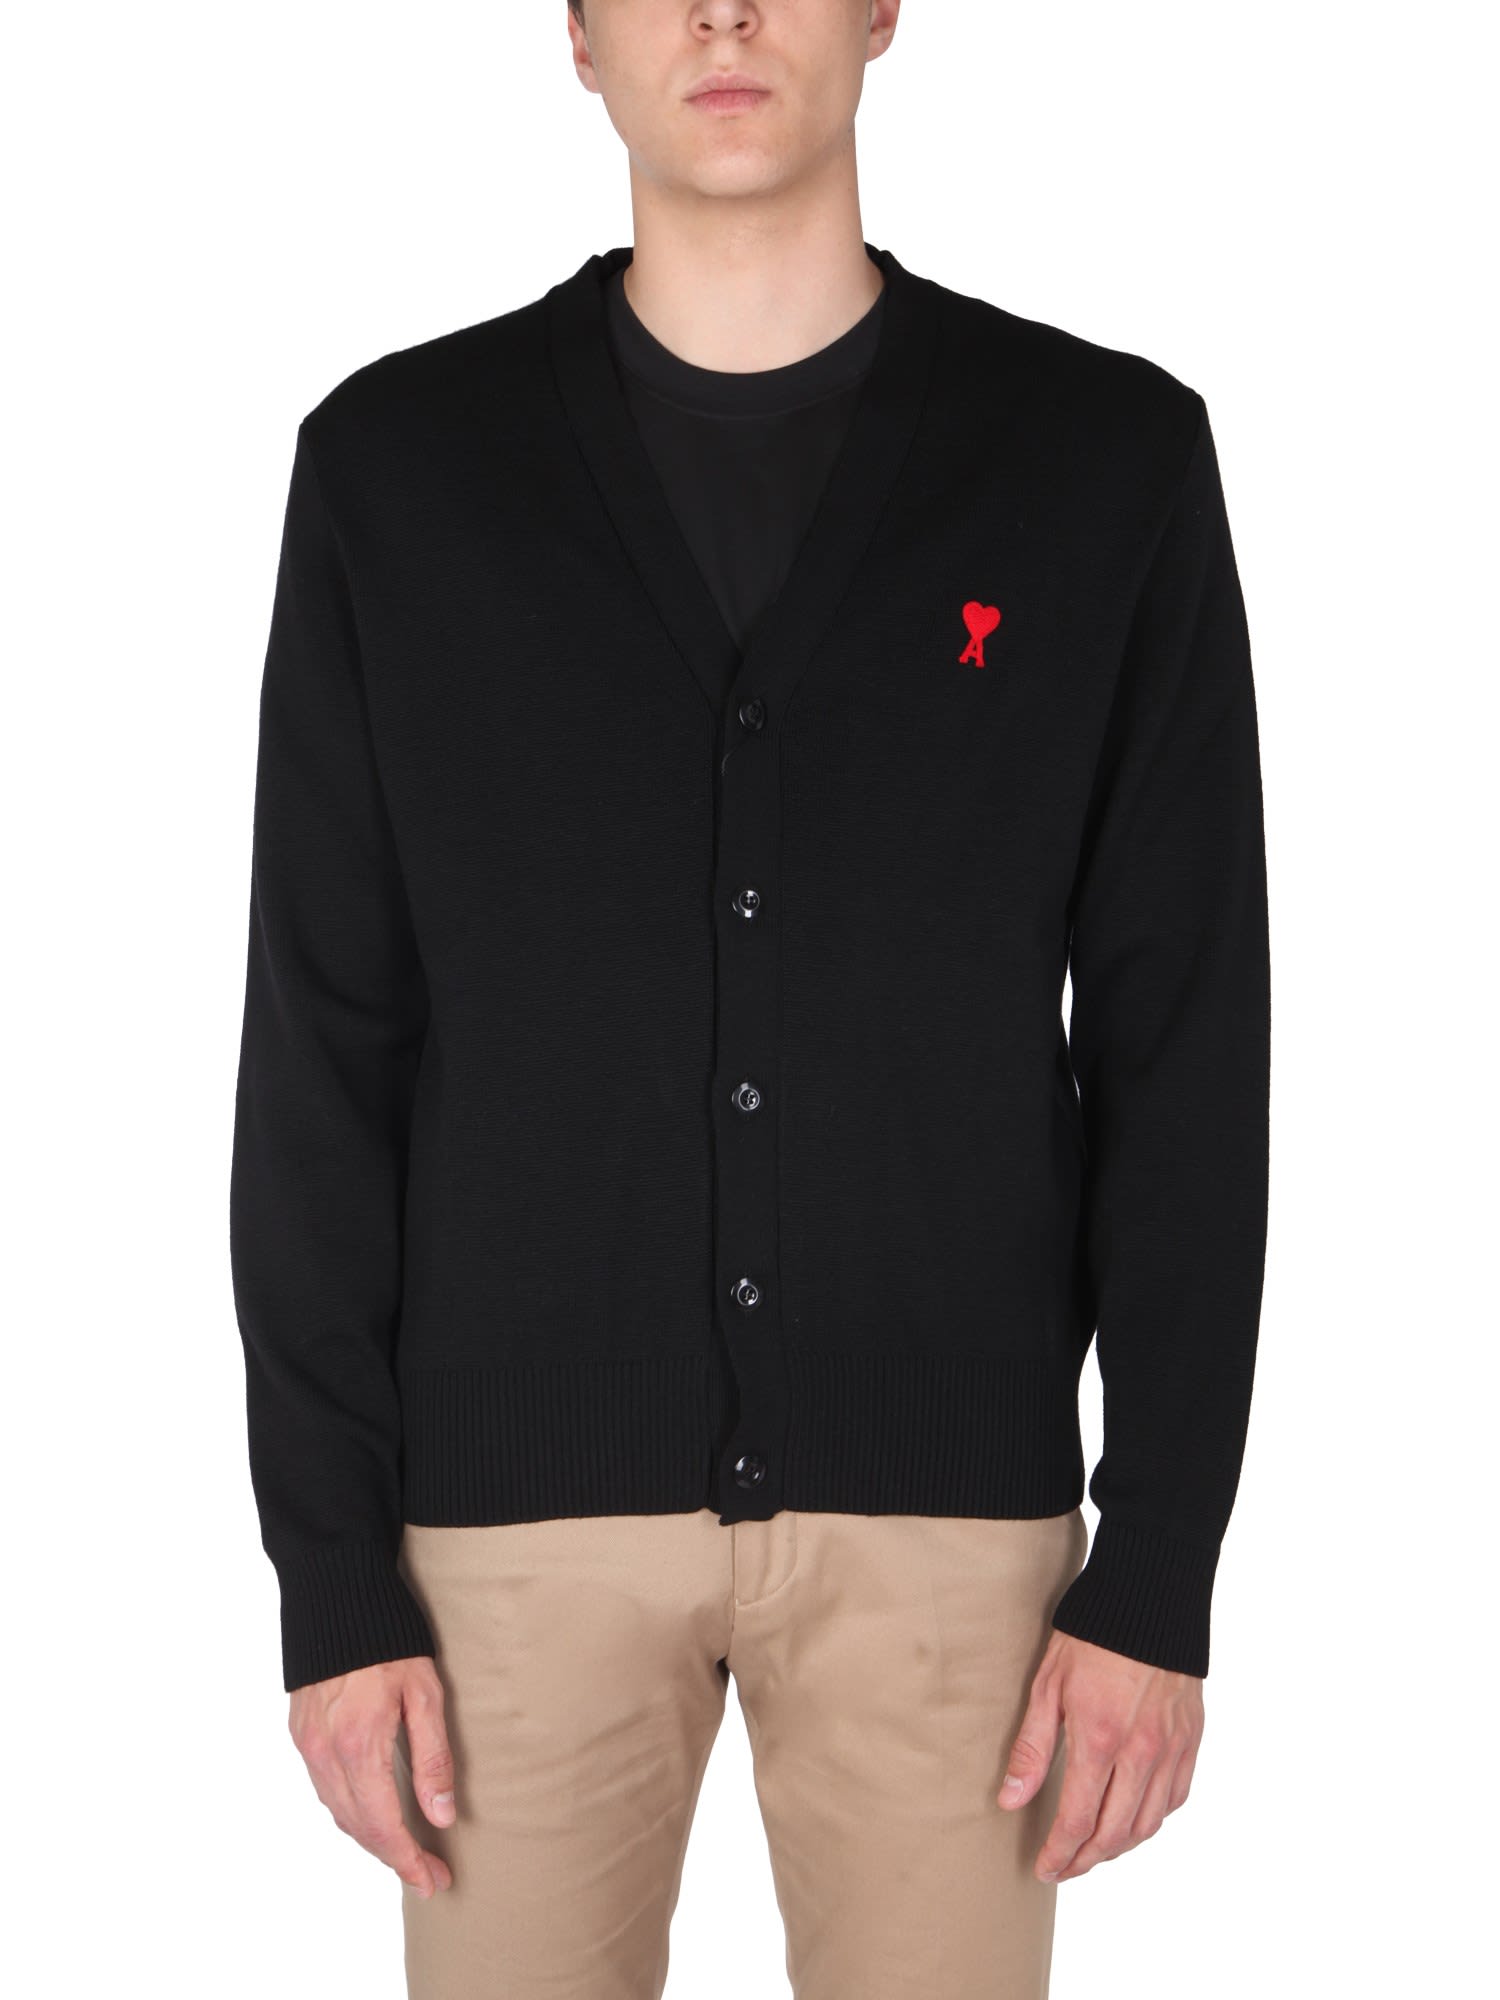 Ami Alexandre Mattiussi Cardigan With Embroidered Heart